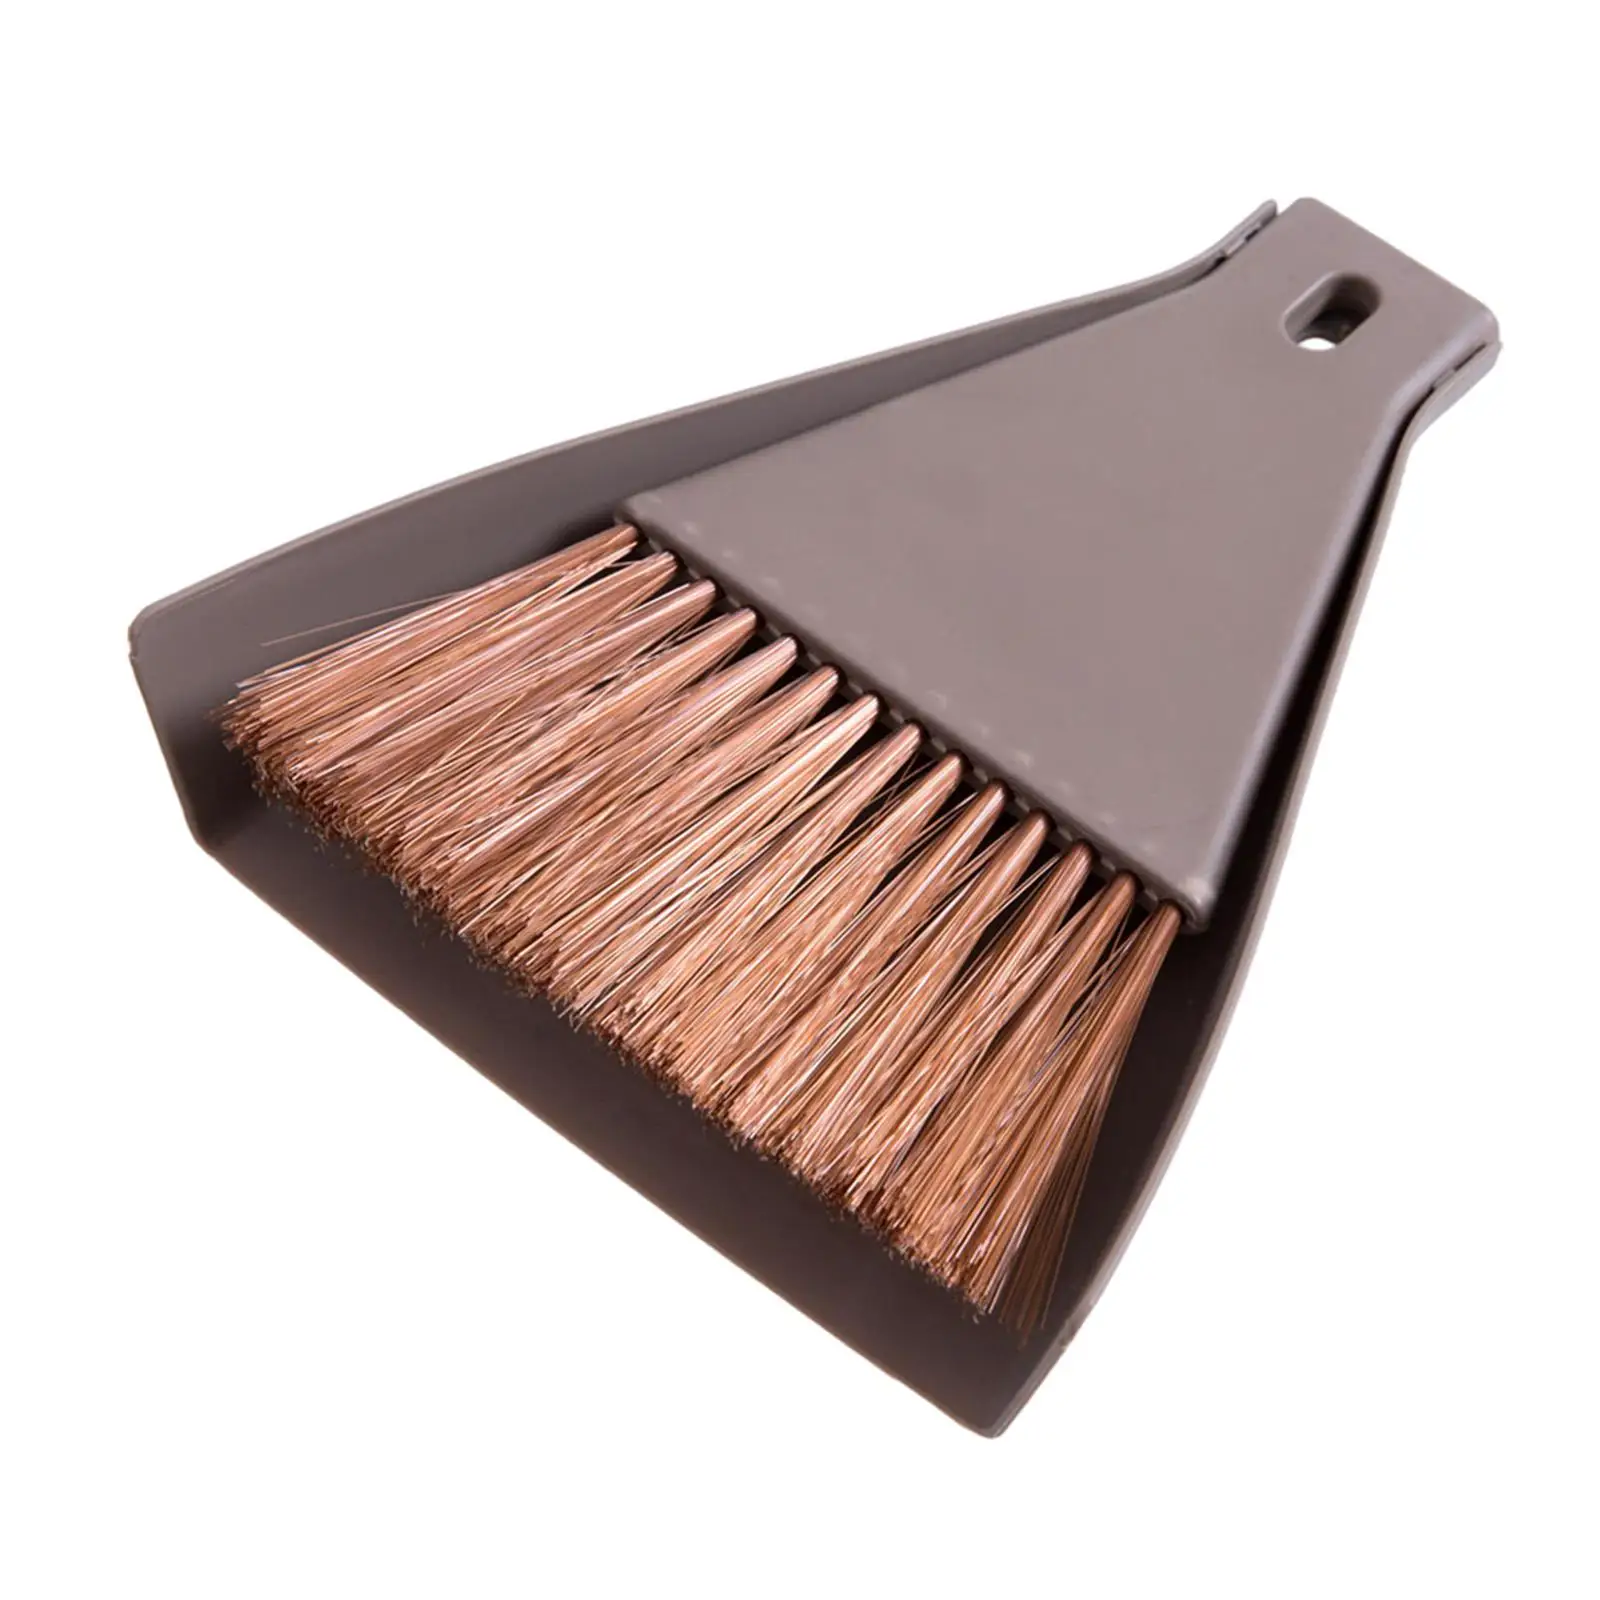 Small Broom and Dustpan Set Dust Pan Cleaning Tools Table Cleaning Brush Sweeping Broom for Desk Table Office Keyboard Home